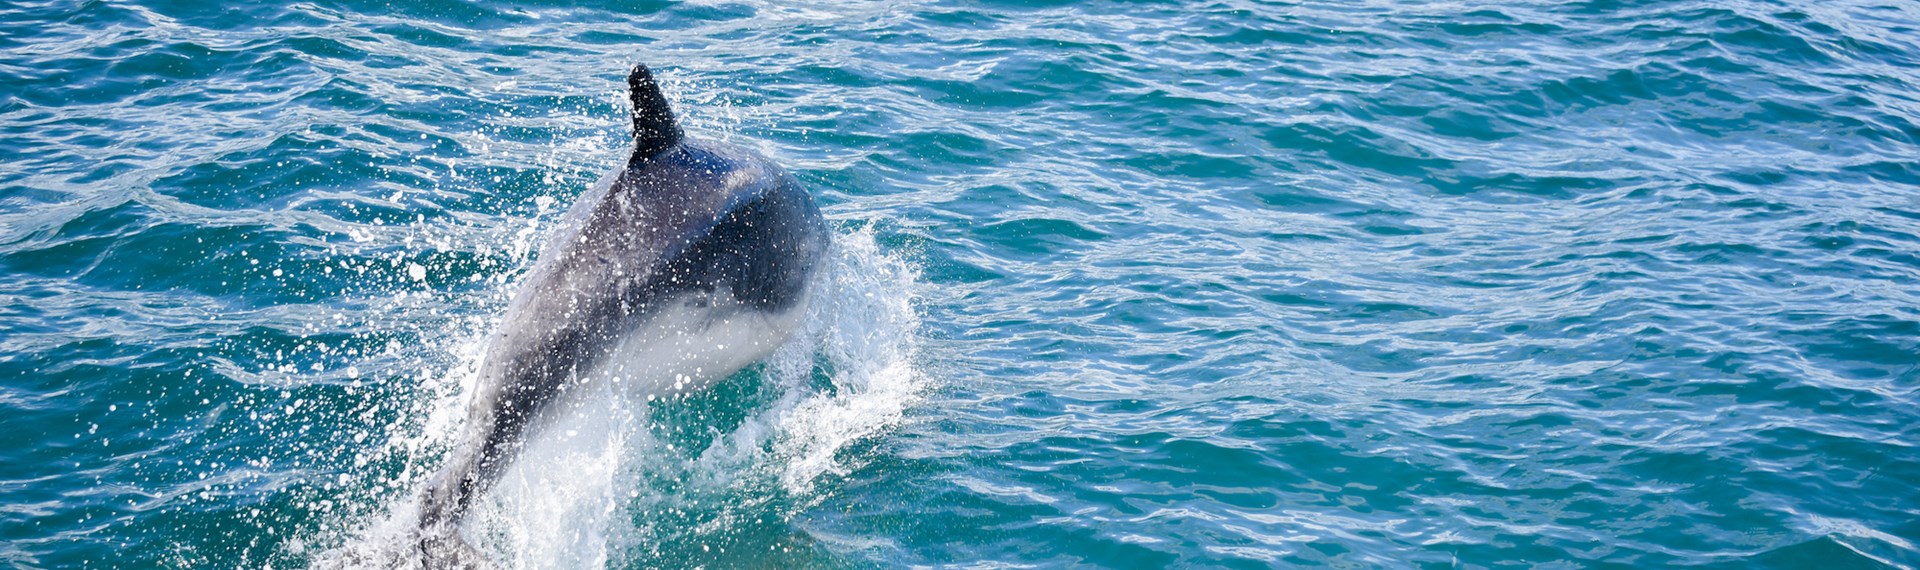 Dolphin spotted during Pelorus Mail Boat Cruise in the Pelorus Sound/Te Hoiere.